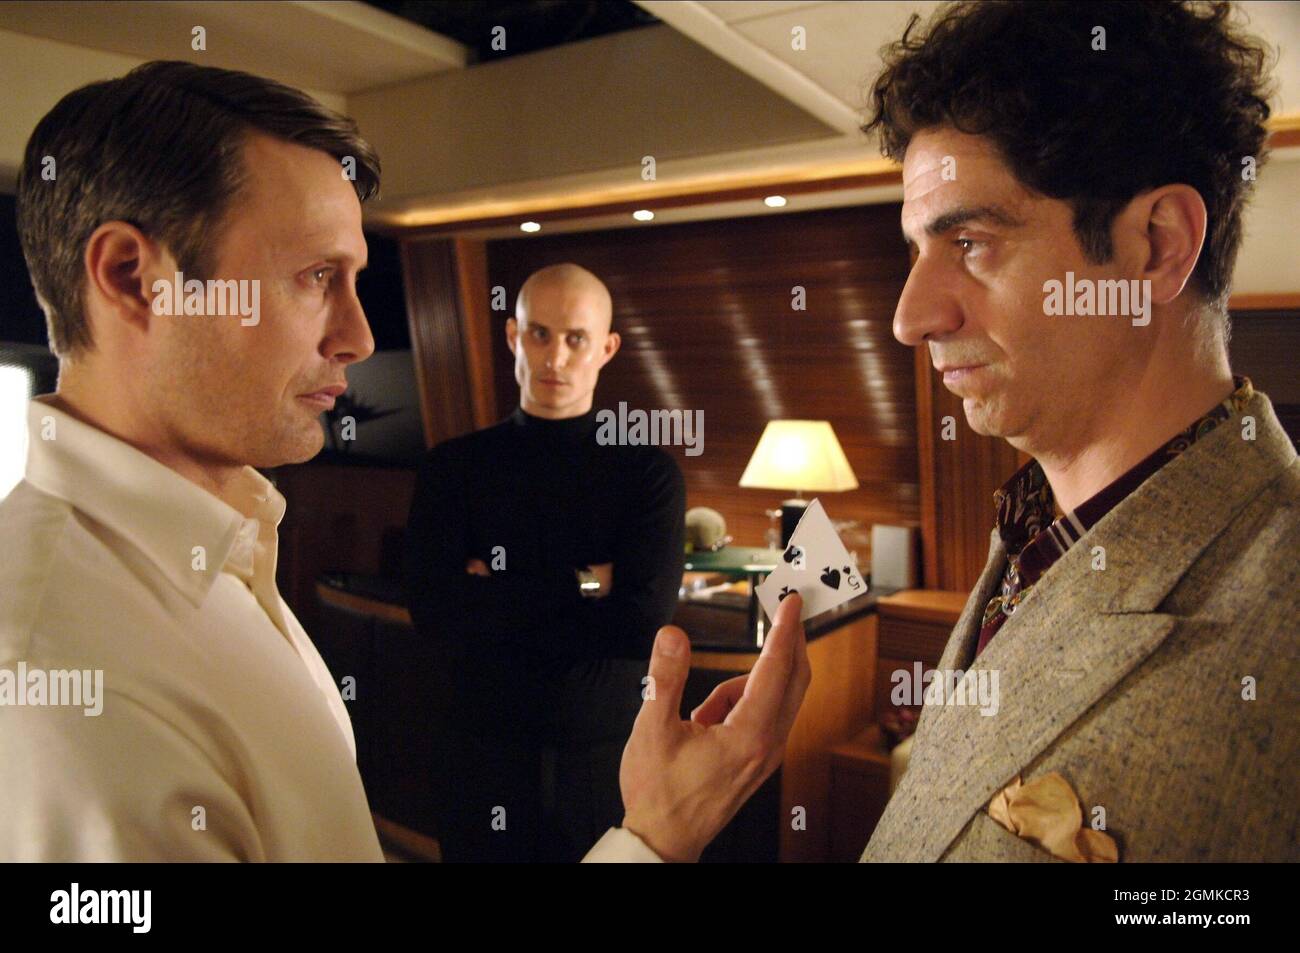 MADS MIKKELSEN, CLEMENS SCHICK, SIMON ABKARIAN, CASINO ROYALE, 2006, ©UNITED ARTISTS/COLUMBIA IMAGES Banque D'Images